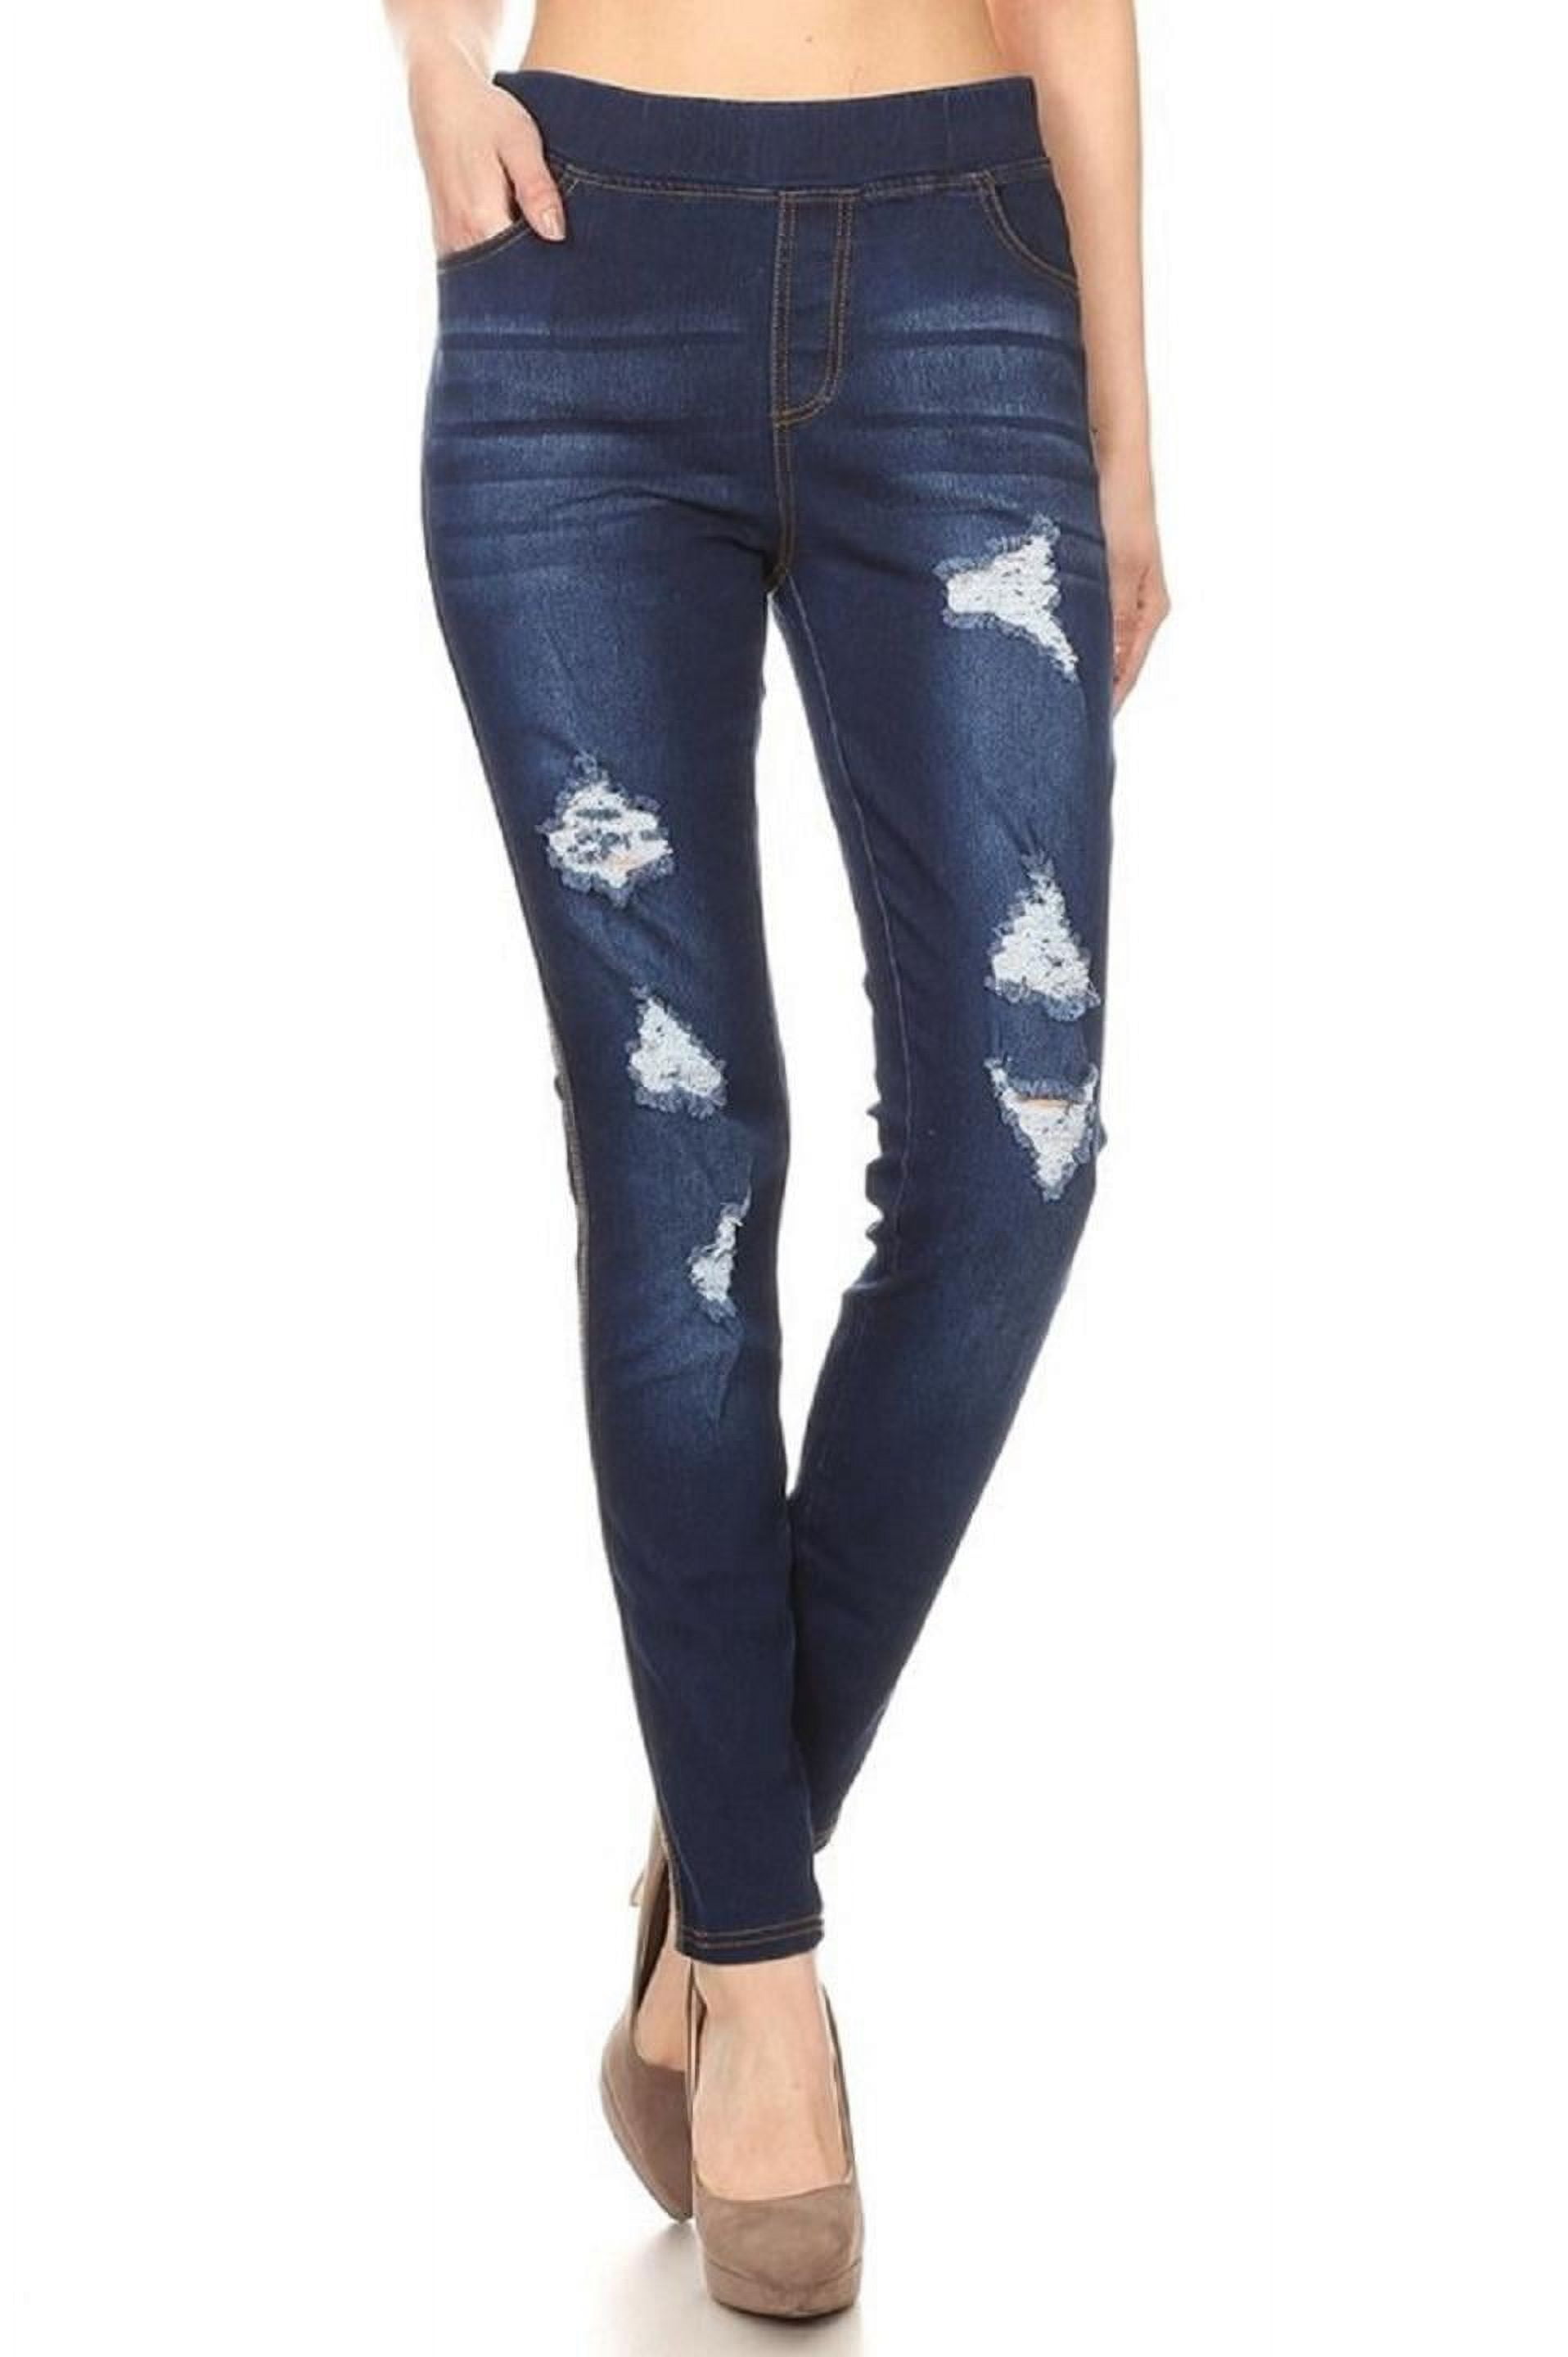 Buy PYL Women Plus Size Distressed Jeans, Ripped Hole Skinny Stretchy Long  Pant L-5XL Blue at